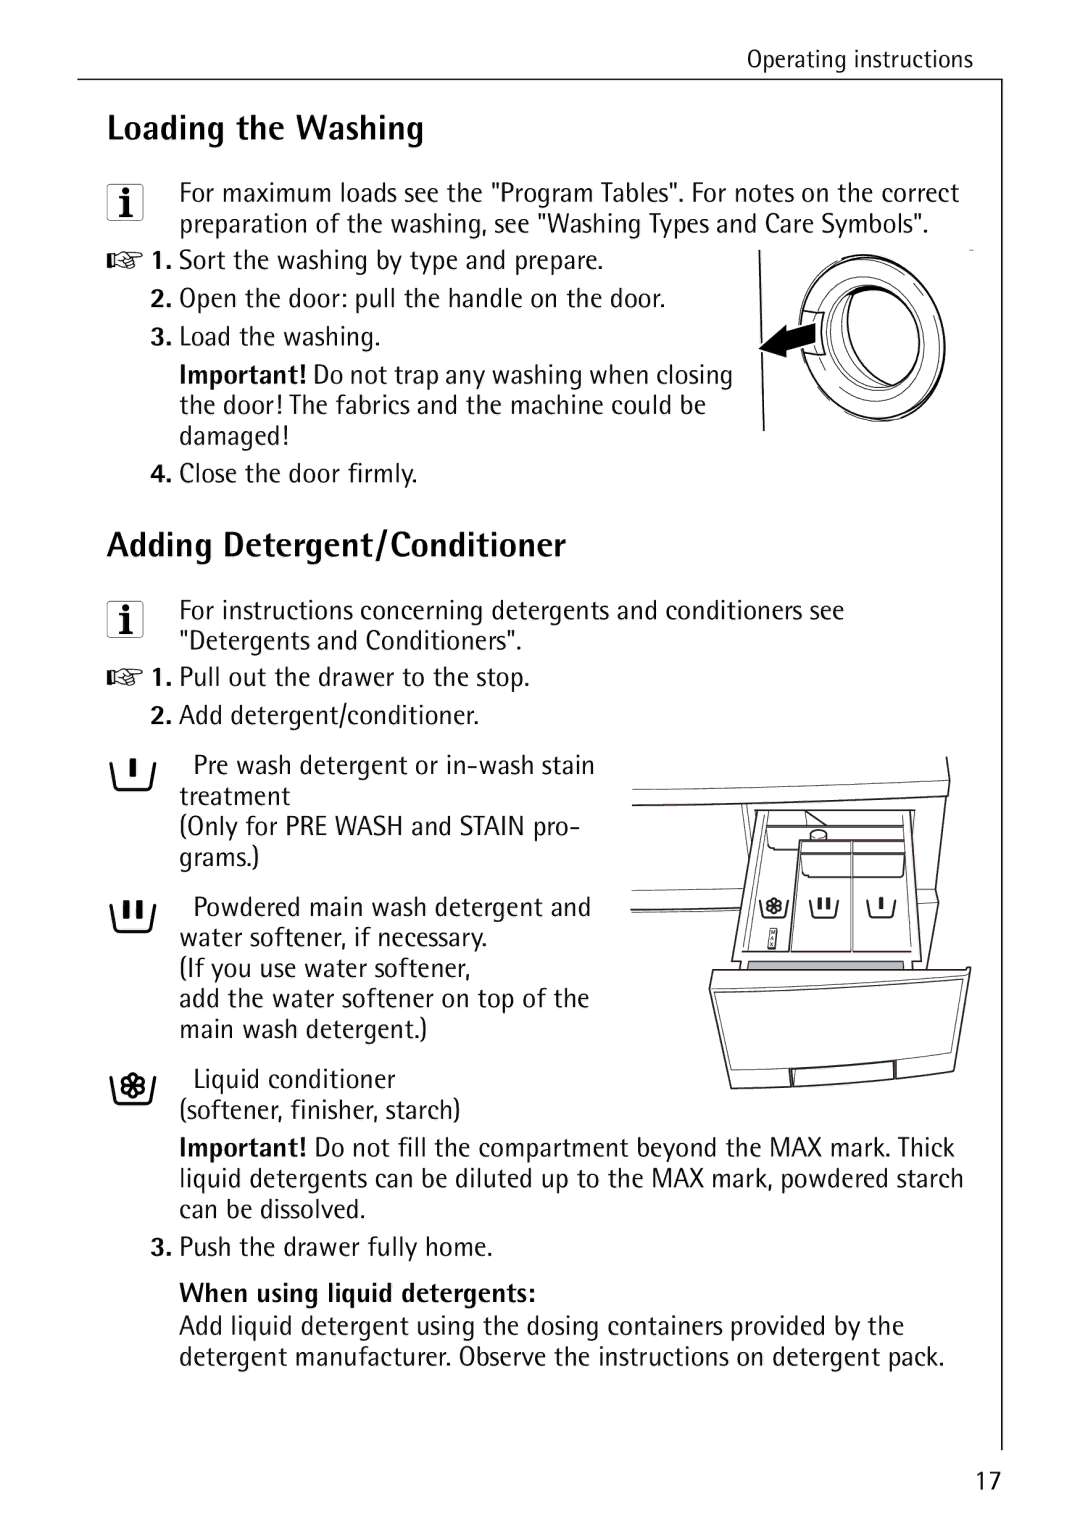 AEG W 1030 manual Loading the Washing, Adding Detergent/Conditioner, When using liquid detergents 